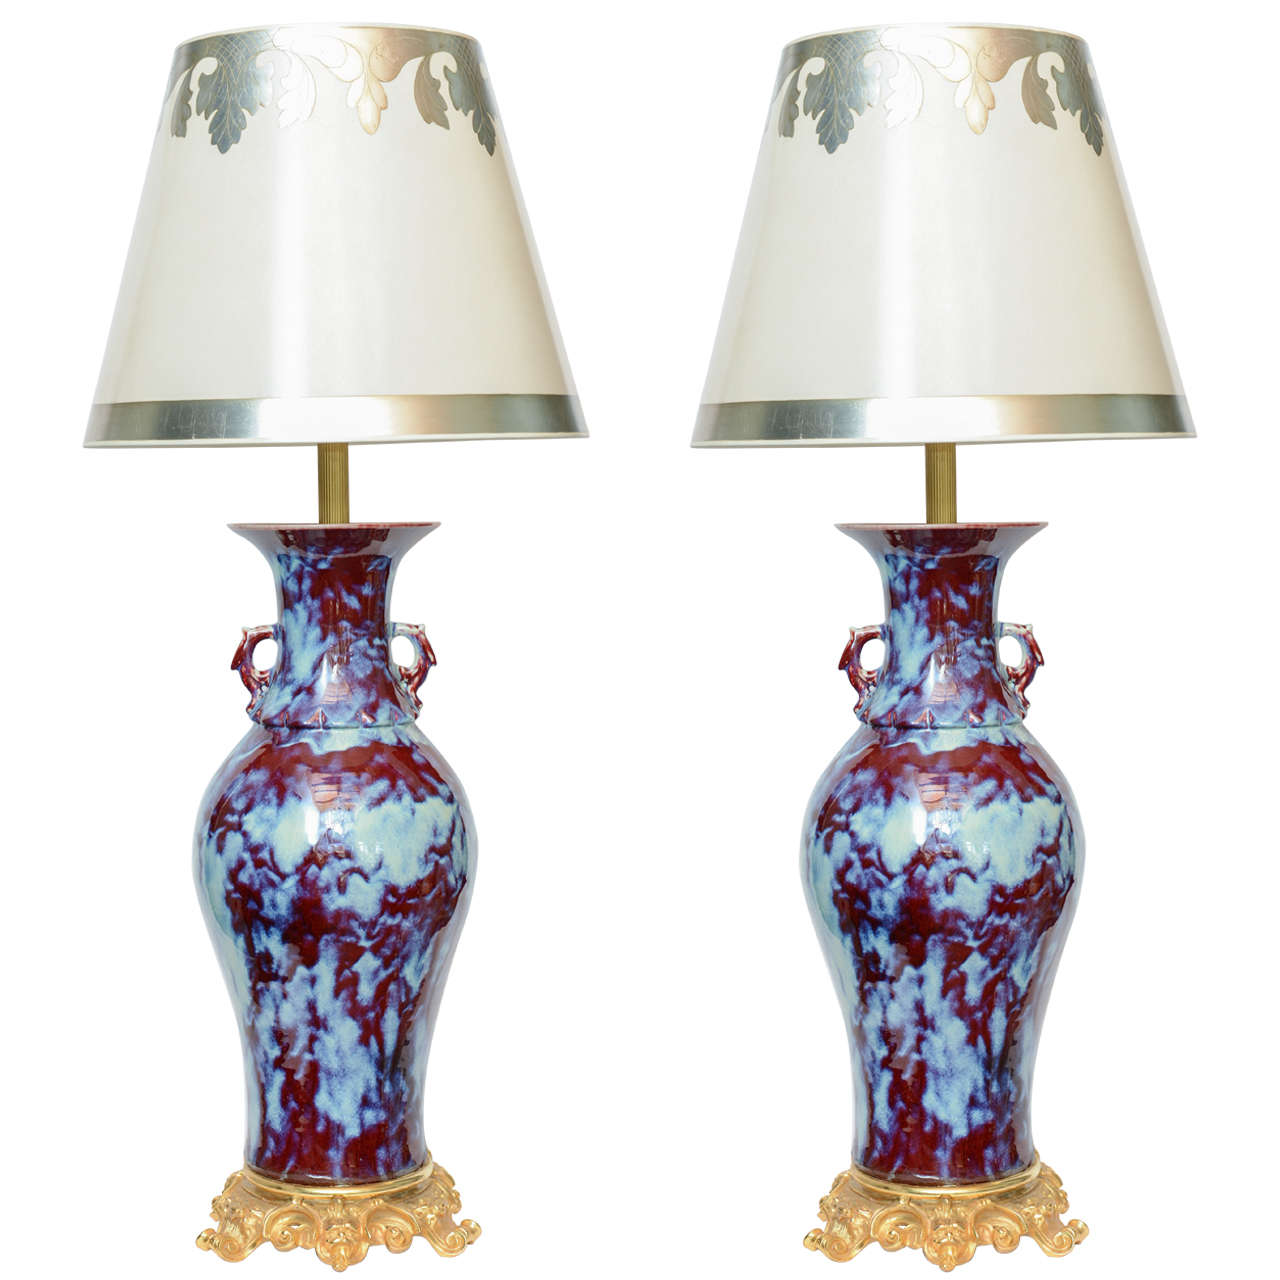 Massive Pair of Chinese Porcelain Lamps For Sale